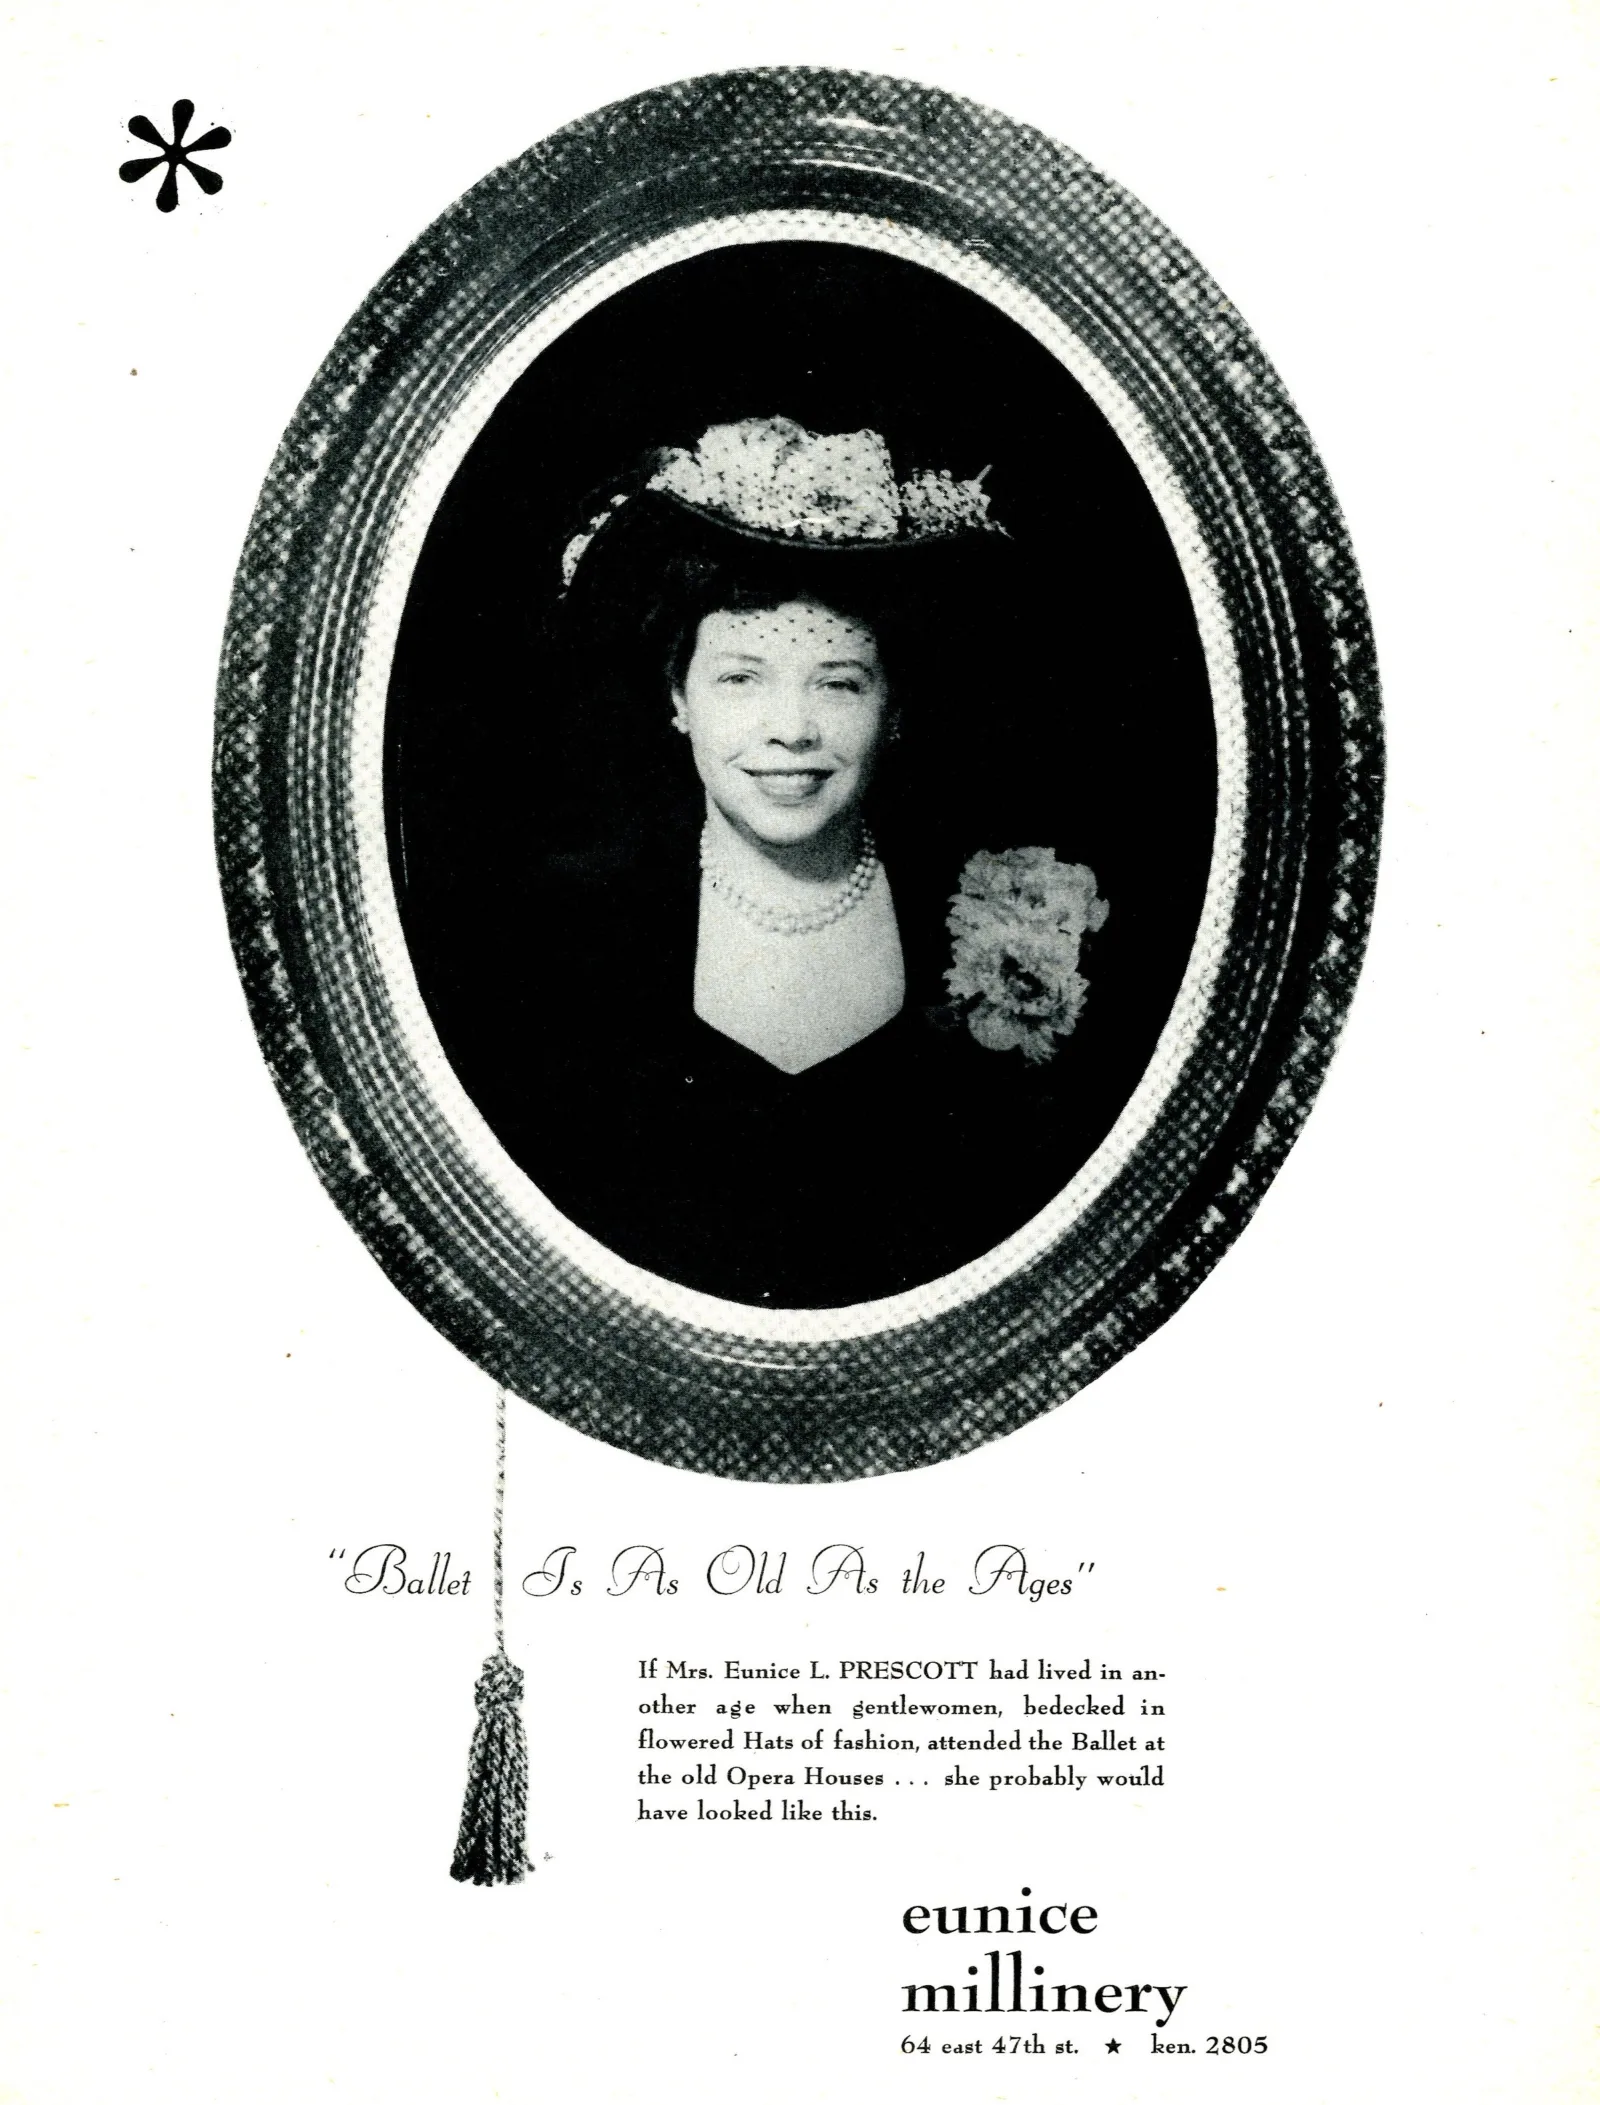 A portrait of Eunice wearing one of her hats. At the bottom of the advertisement is the name of her shop, Eunice Millinery, and the address.